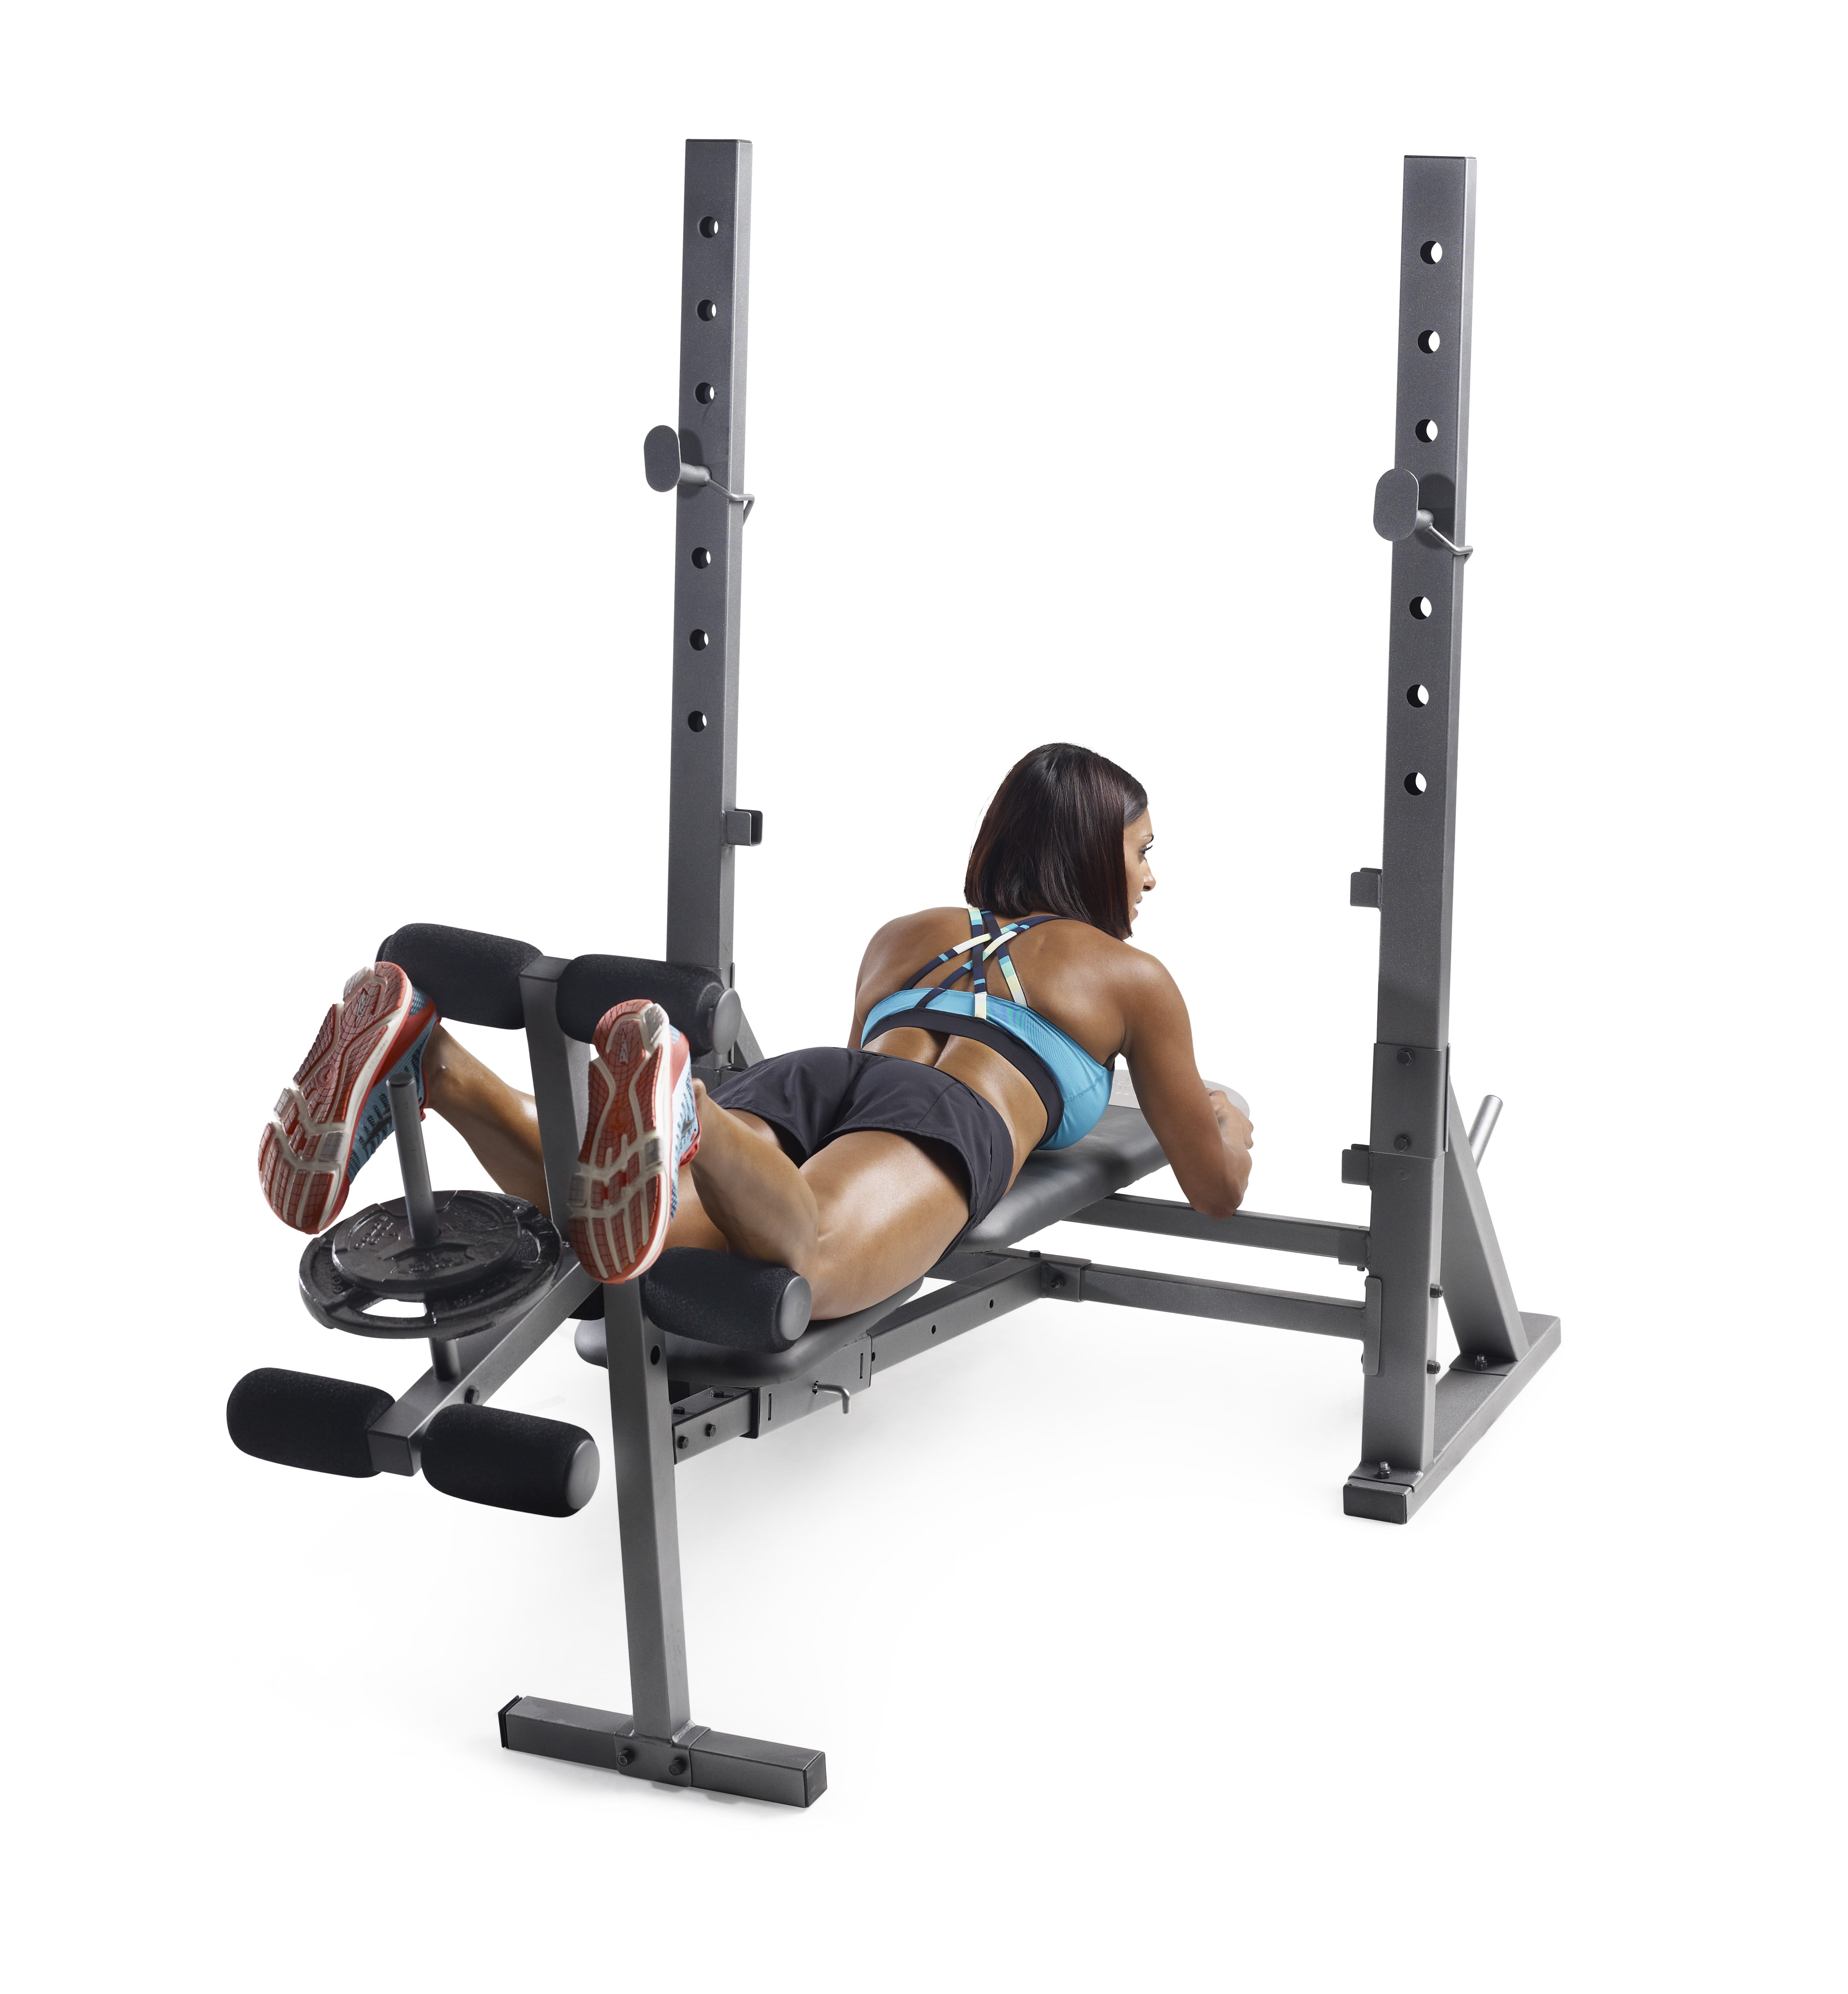 Golds Gym Olympic Weight Lifting Bench Workout Press Exercise Fitness XR 10.1 